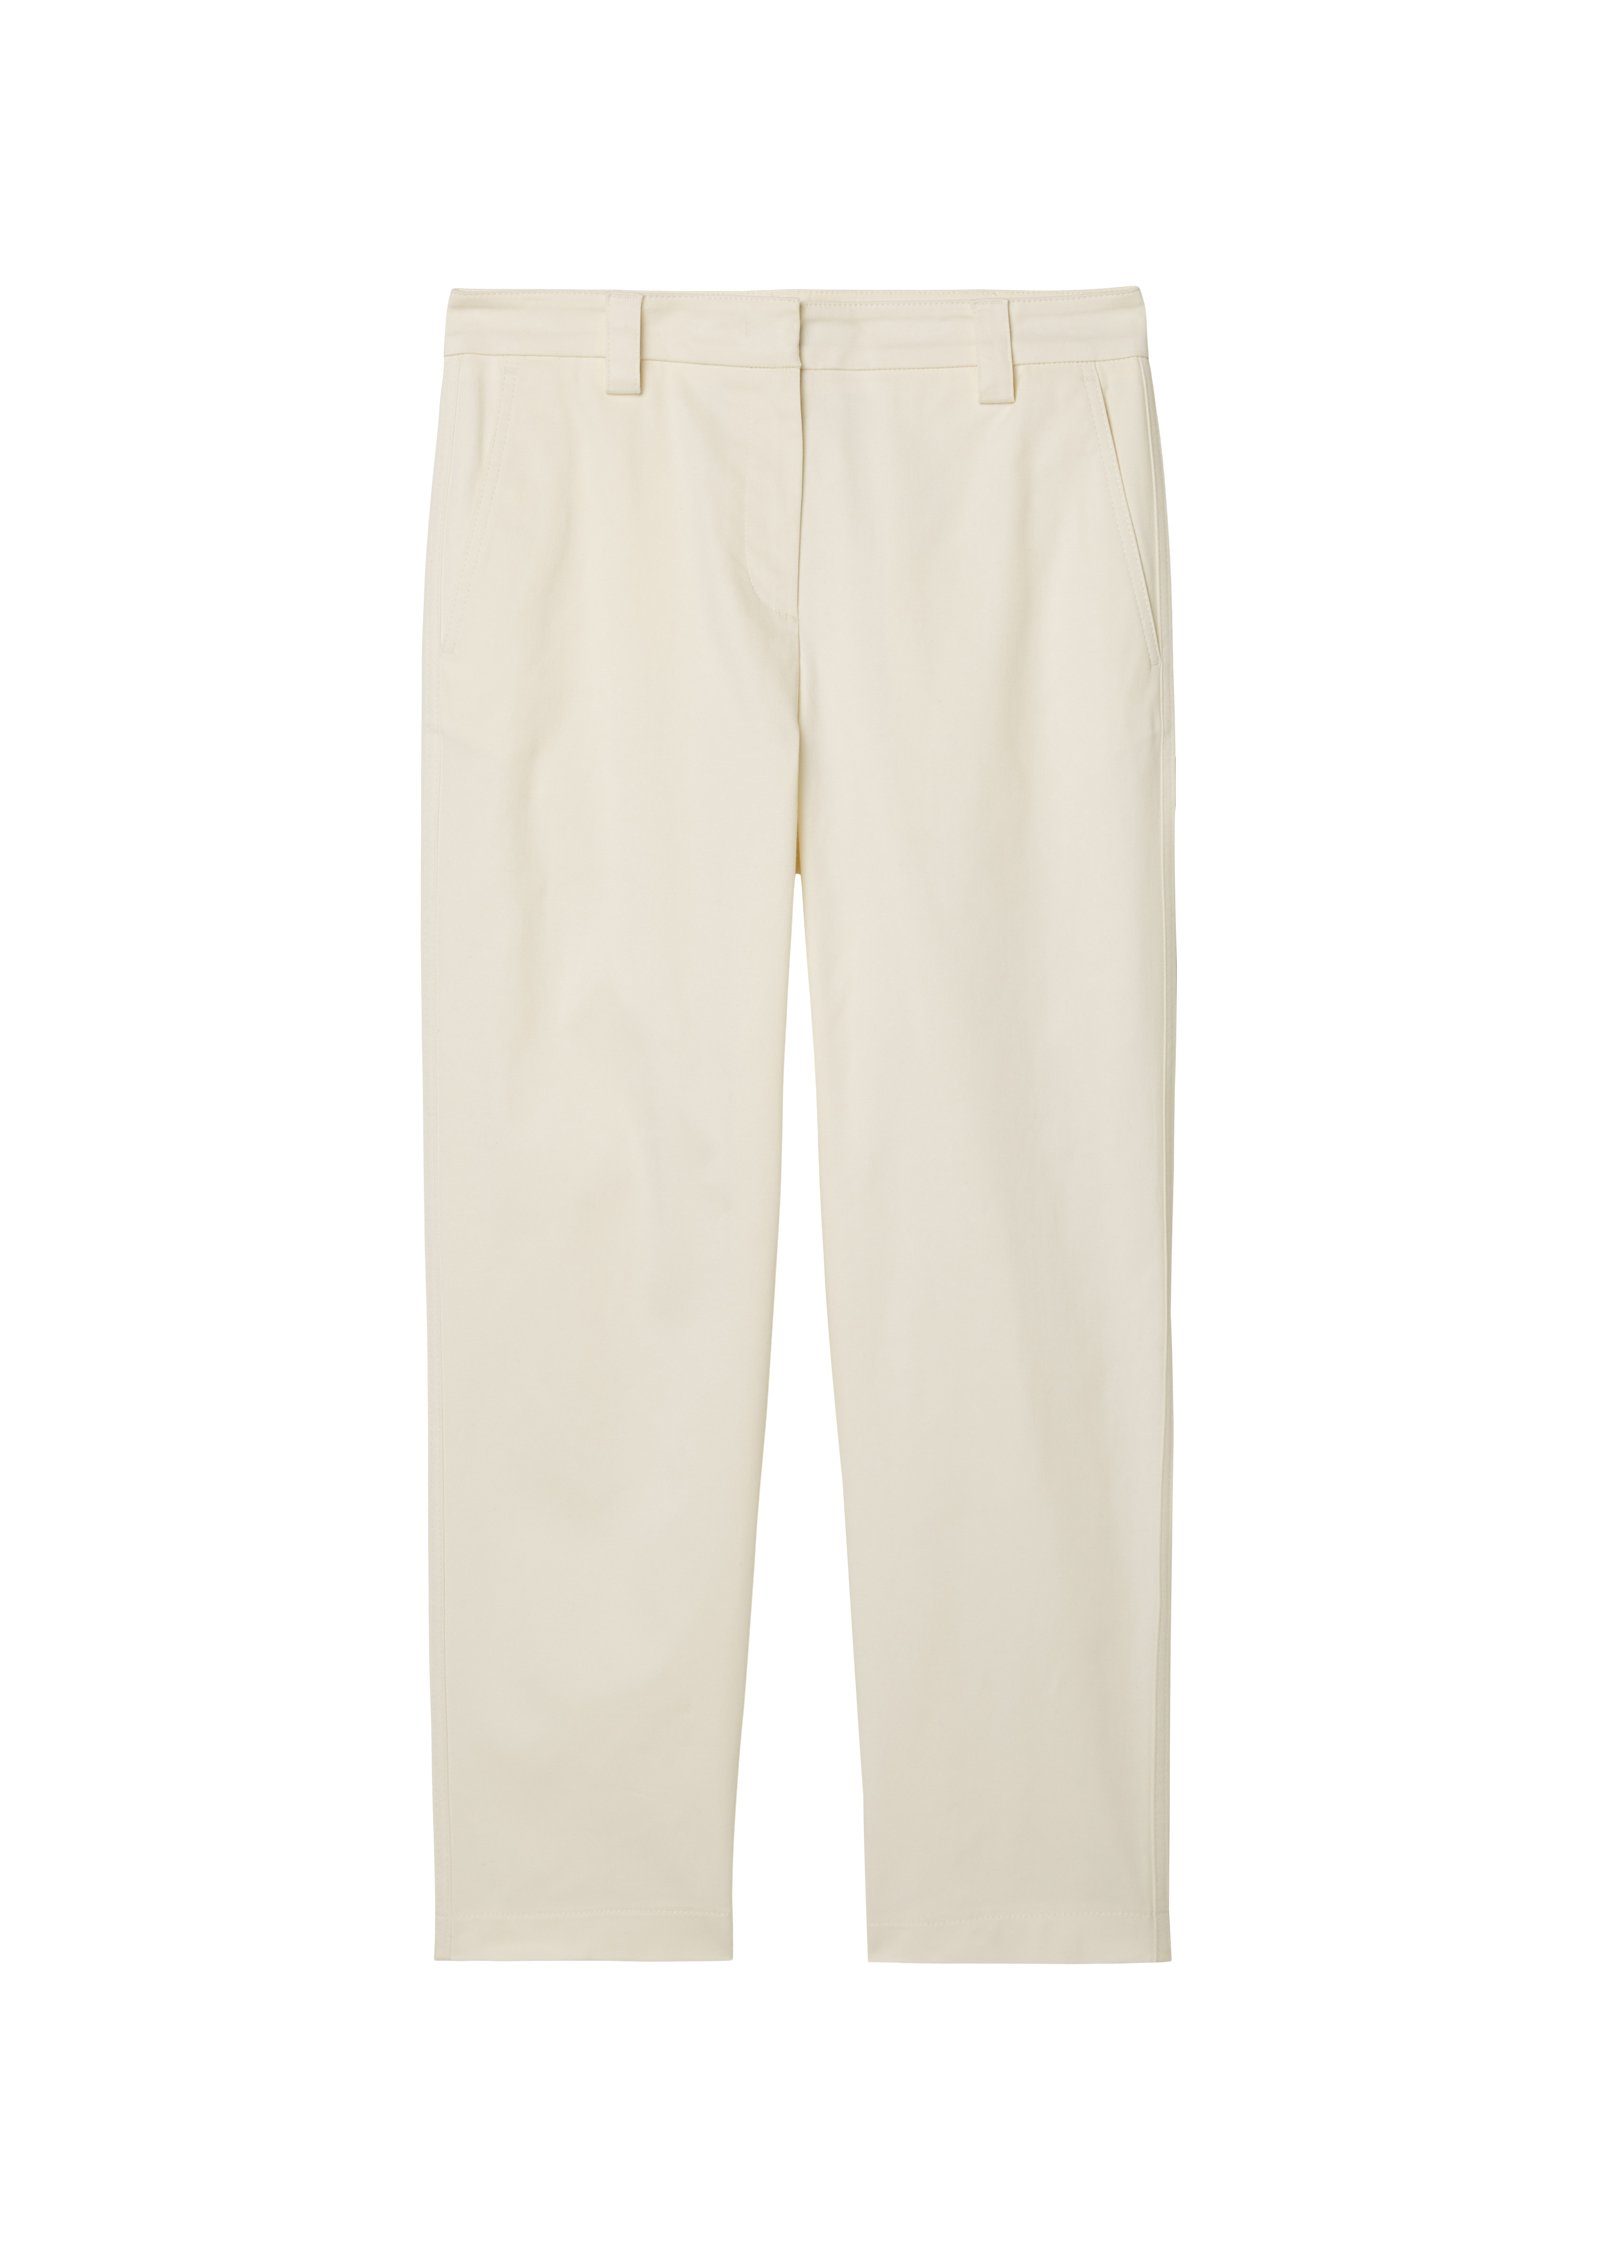 high Pants, style, tapered chalky pocket leg, sand modernen modern welt 7/8-Hose Marc O'Polo Chino-Style im rise, chino